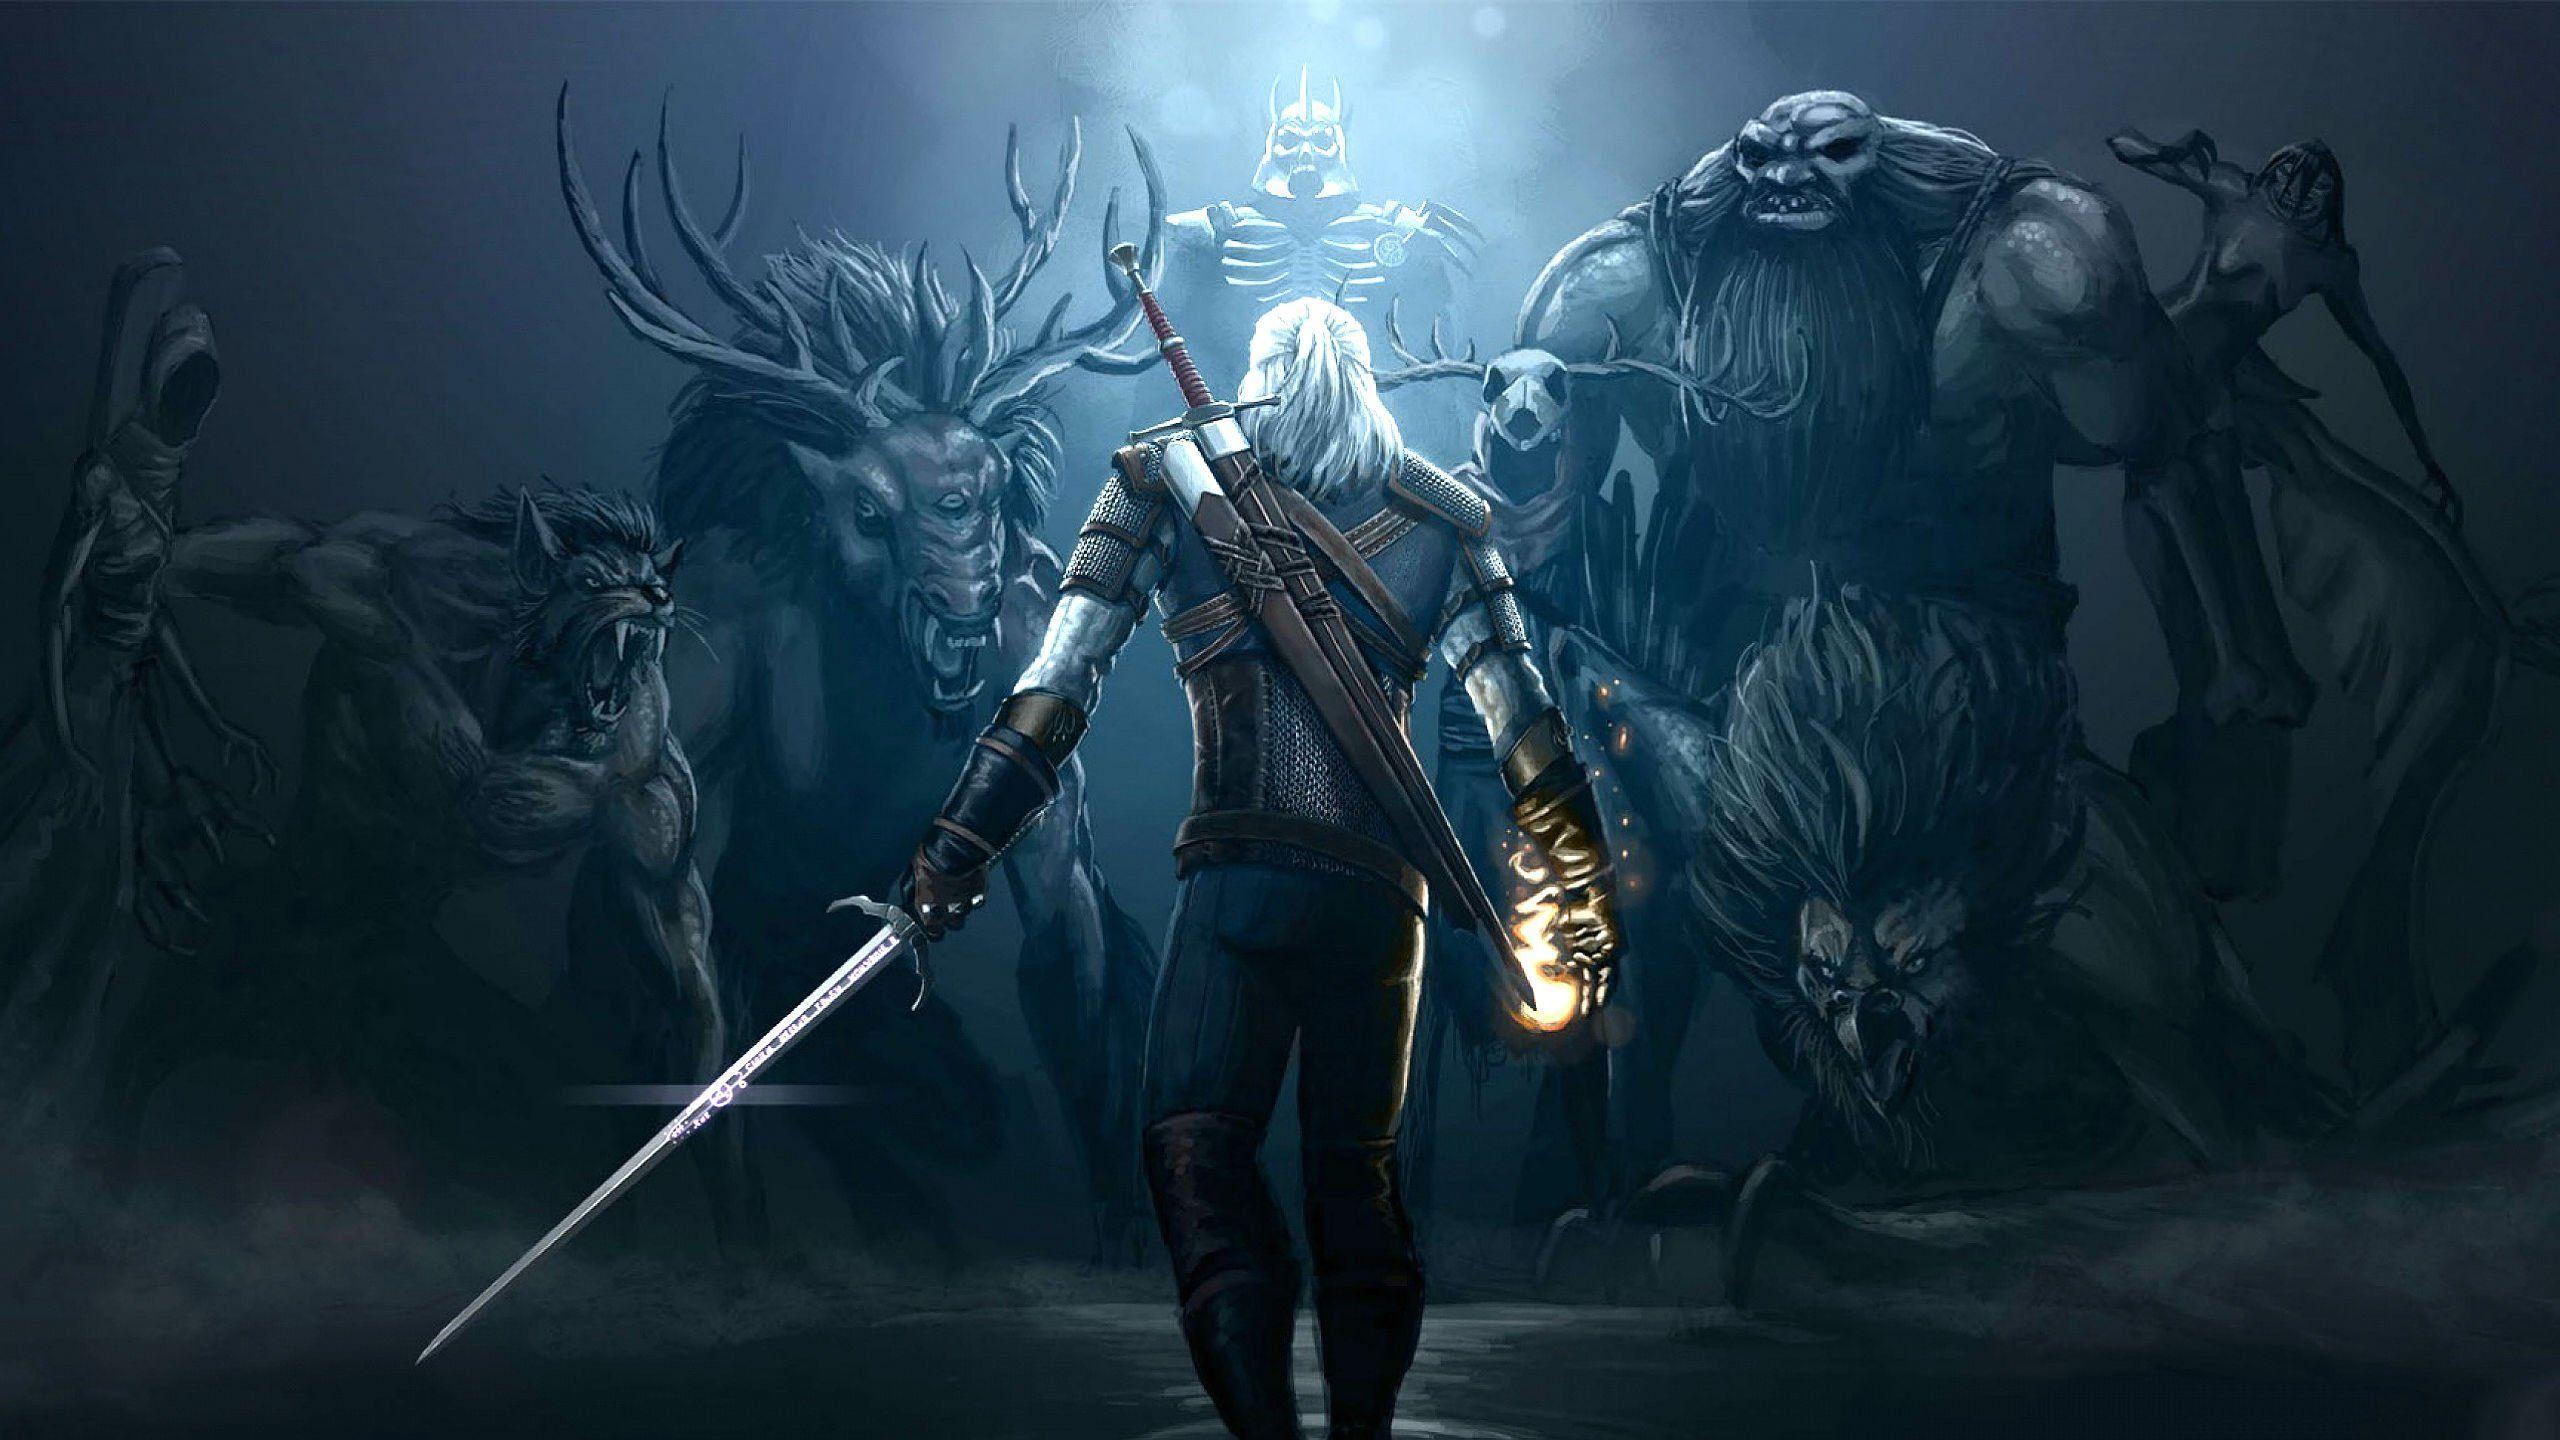 2560 x 1440 · jpeg - The Witcher 3 Wild Hunt Wallpapers - Wallpaper Cave